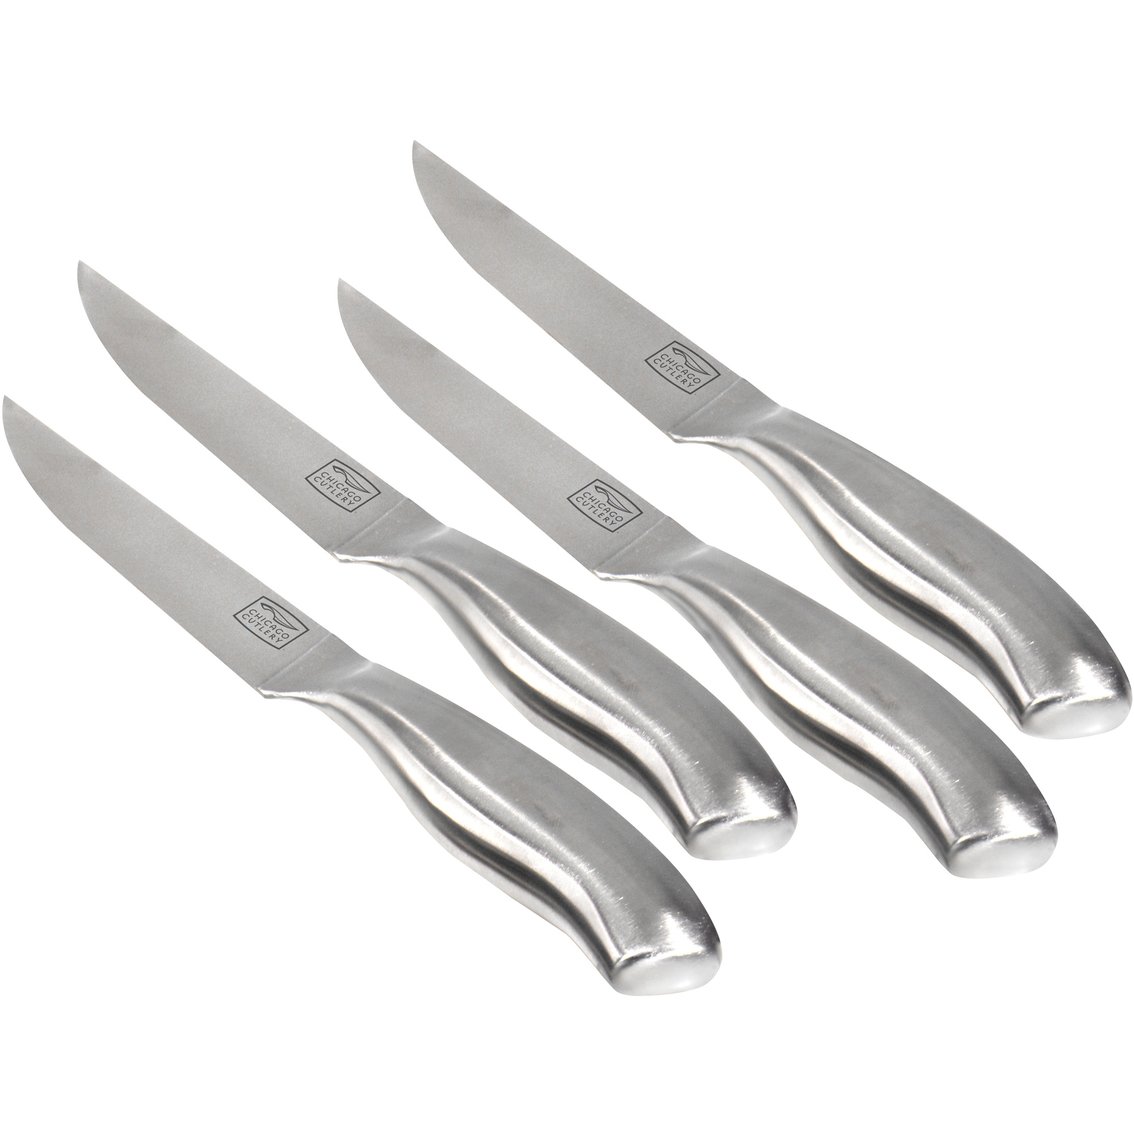 Chicago Cutlery Insignia Stainless Steel 4 Pc. Steak Knife Set